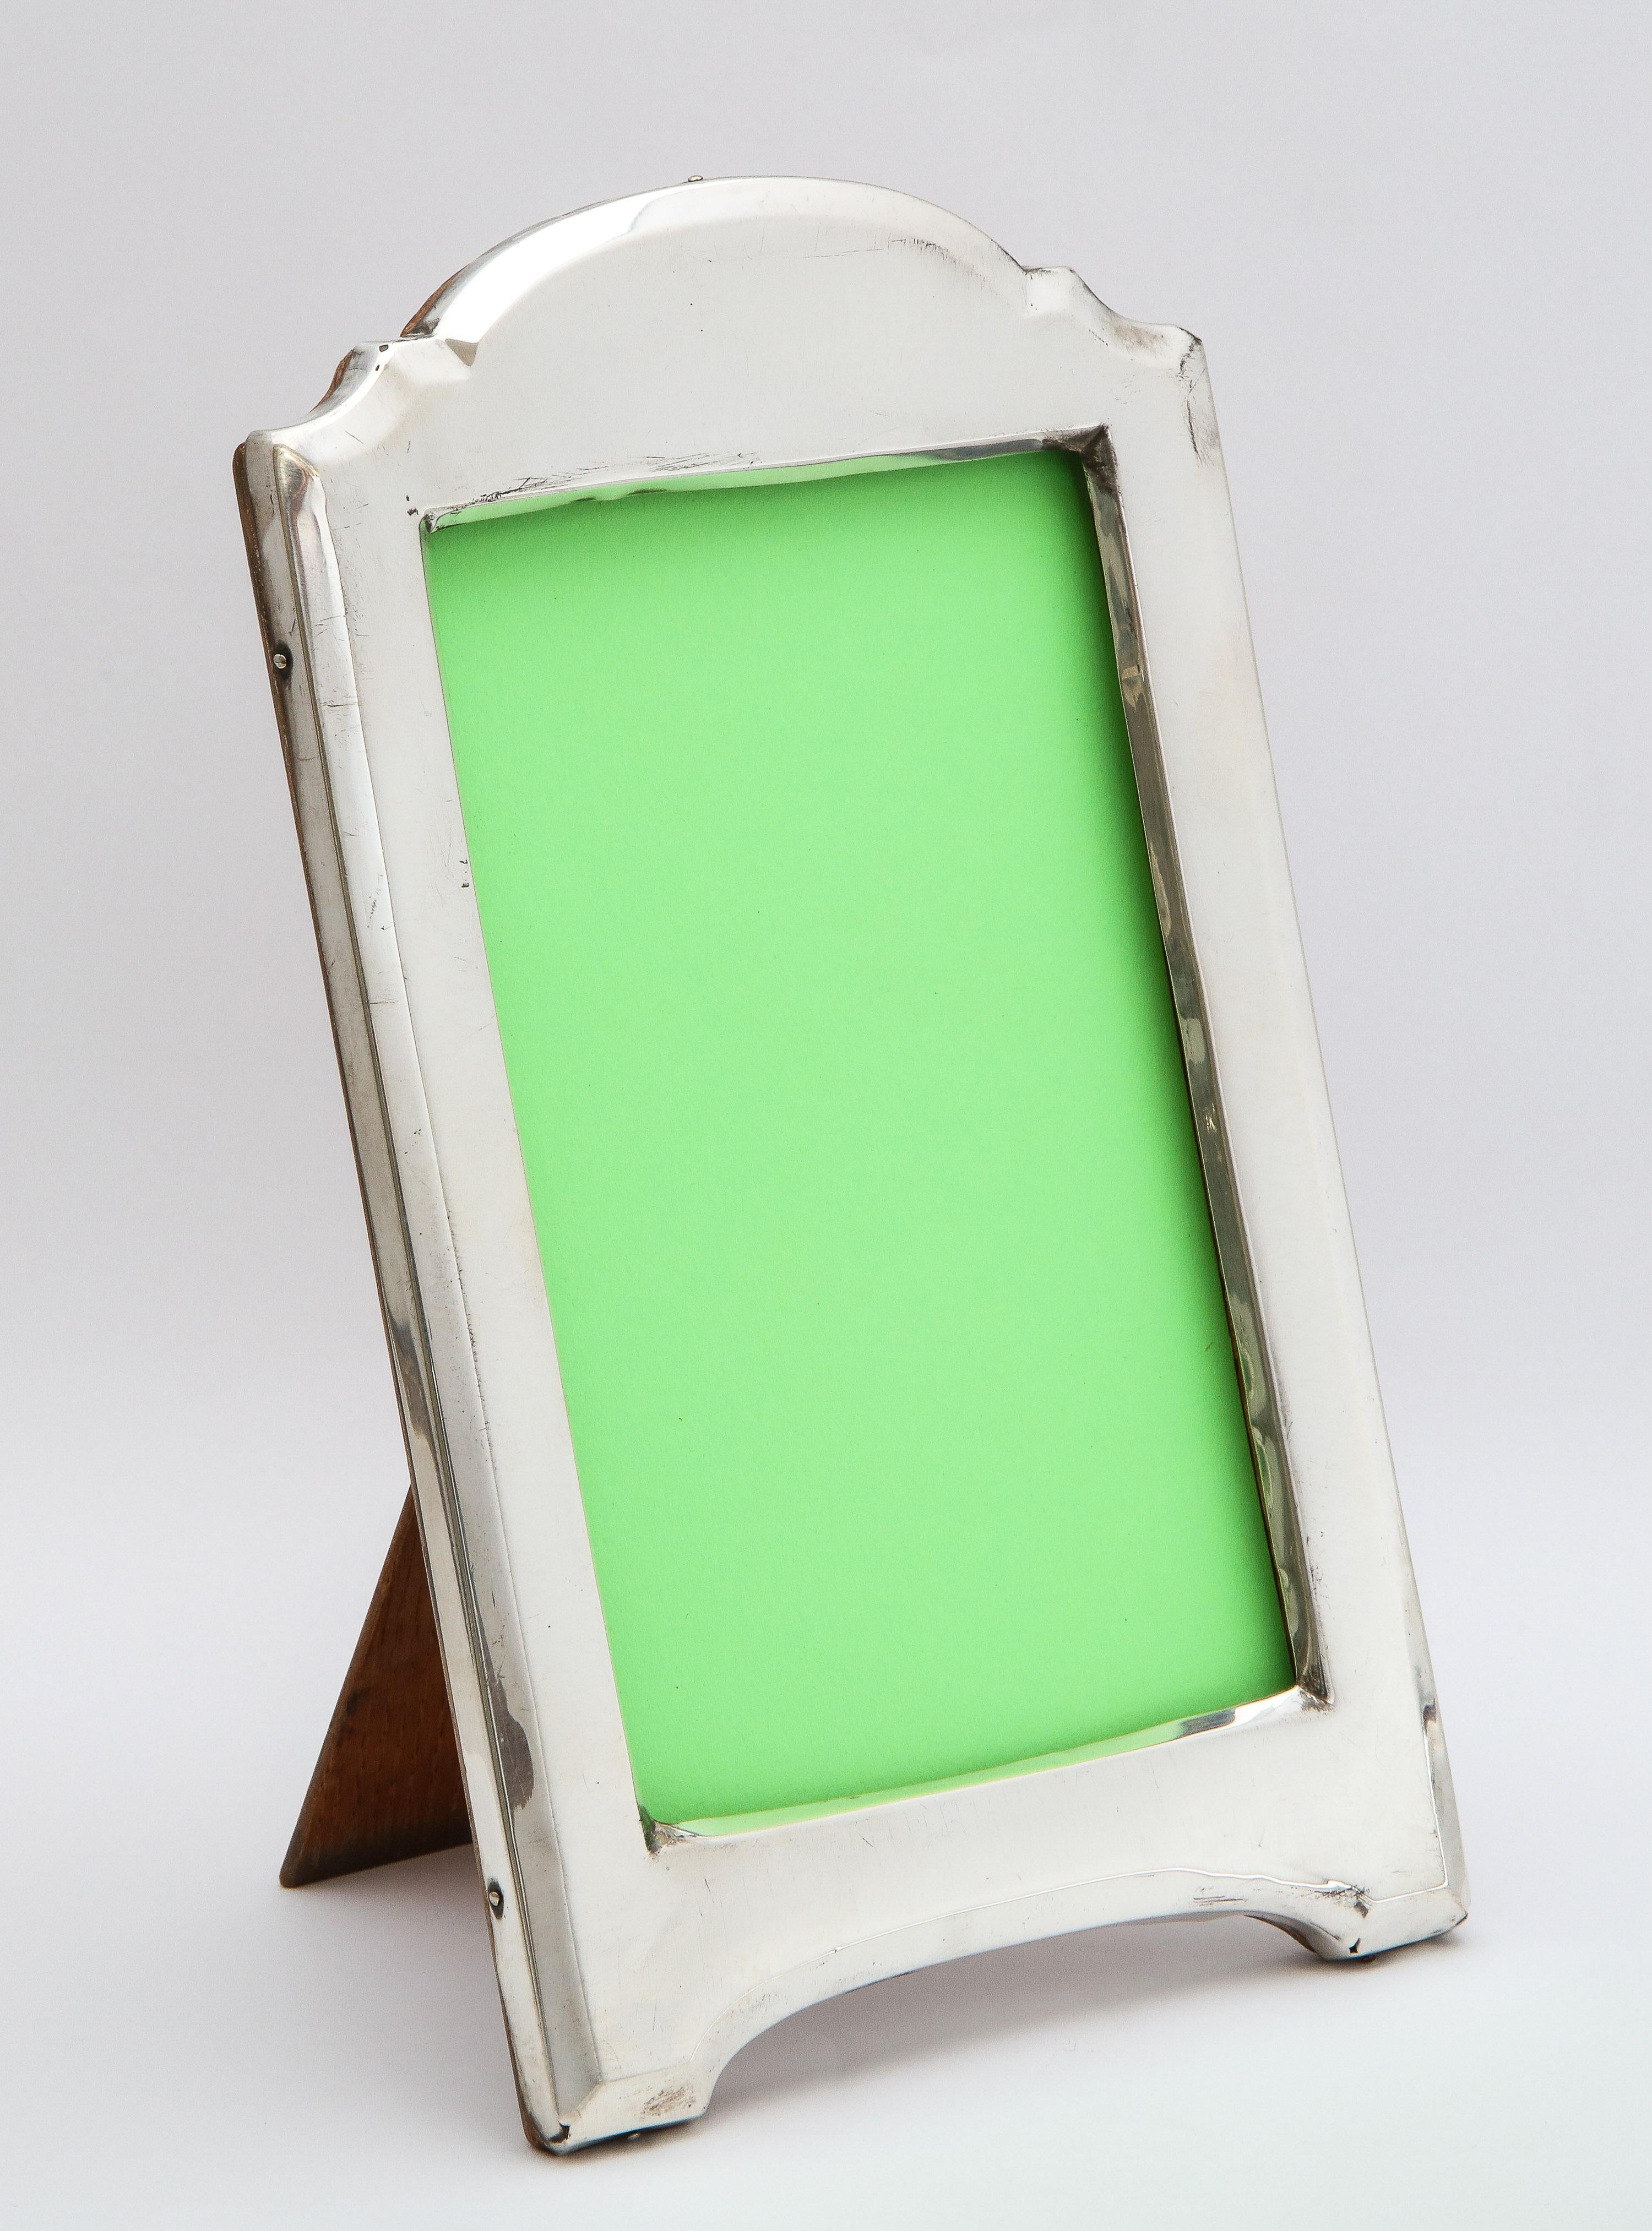 Edwardian, sterling silver, hump-top picture frame with wood back, Birmingham, England, year-hallmarked for 1915, James and John Deakin (James Deakin and Sons) - makers. Measures 8 1/4 inches high at highest point x 5 inches wide x 6 inches deep